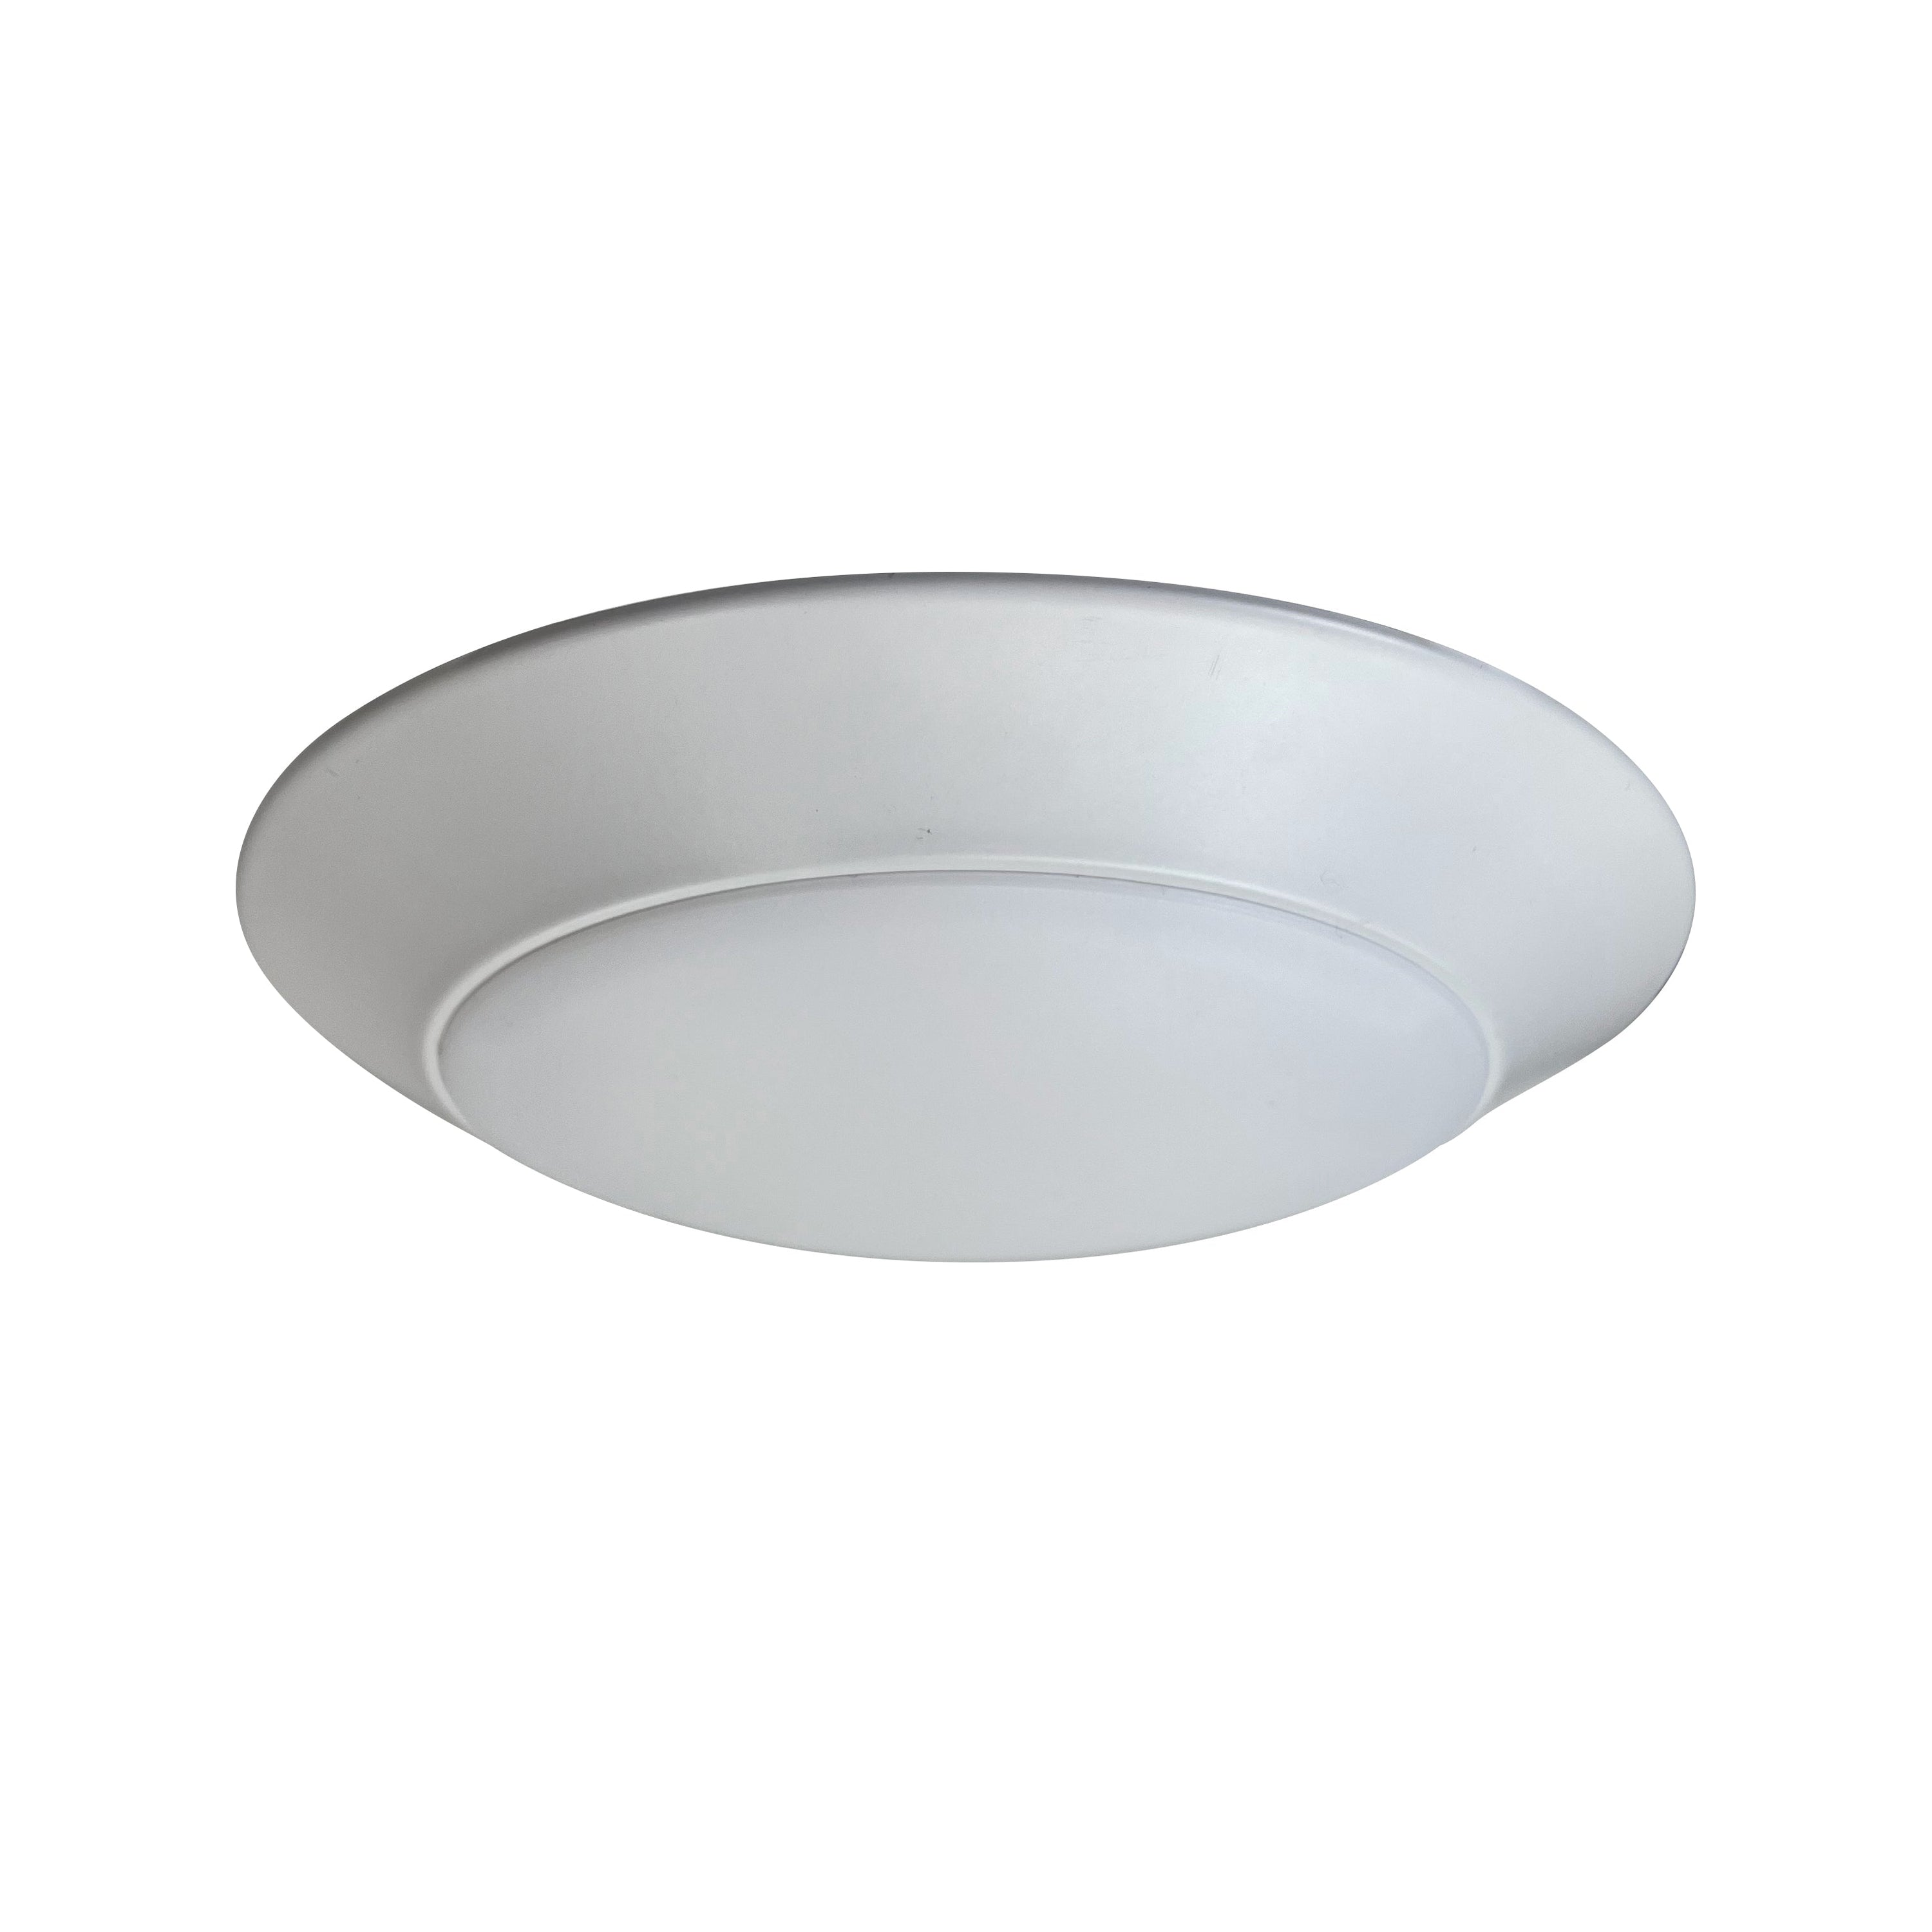 Nora Lighting NLOPAC-R6TWW - Surface - 6 Inch AC Opal LED Surface Mount, 1200lm / 16W, Selectable CCT, White finish